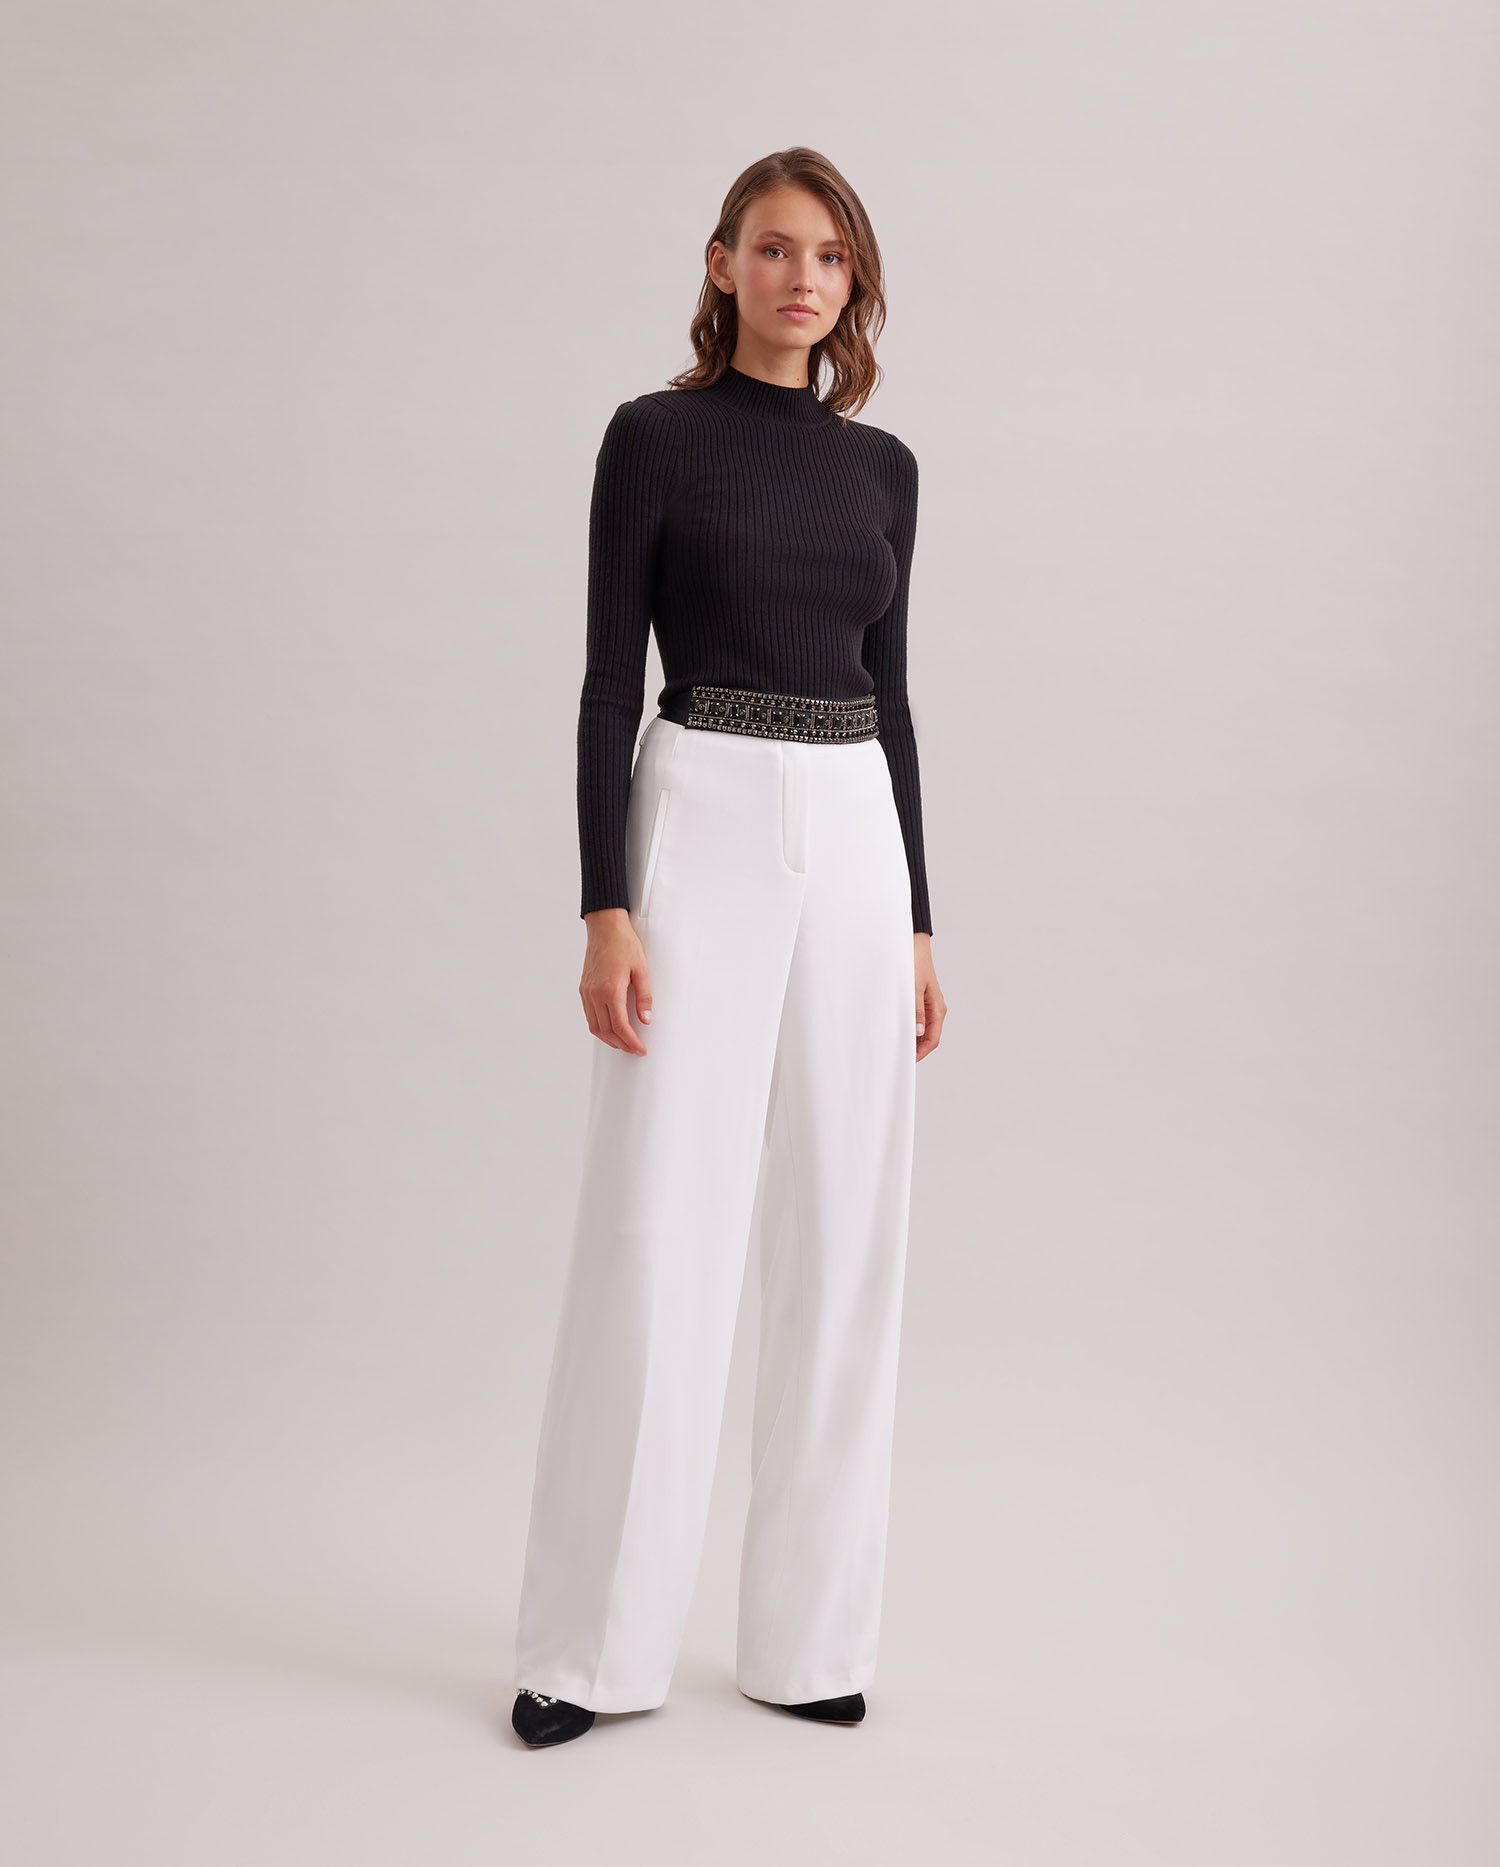 Disocver the CARNET Long sleeve ribbed knit top with mock neck from ANNE FONTAINE